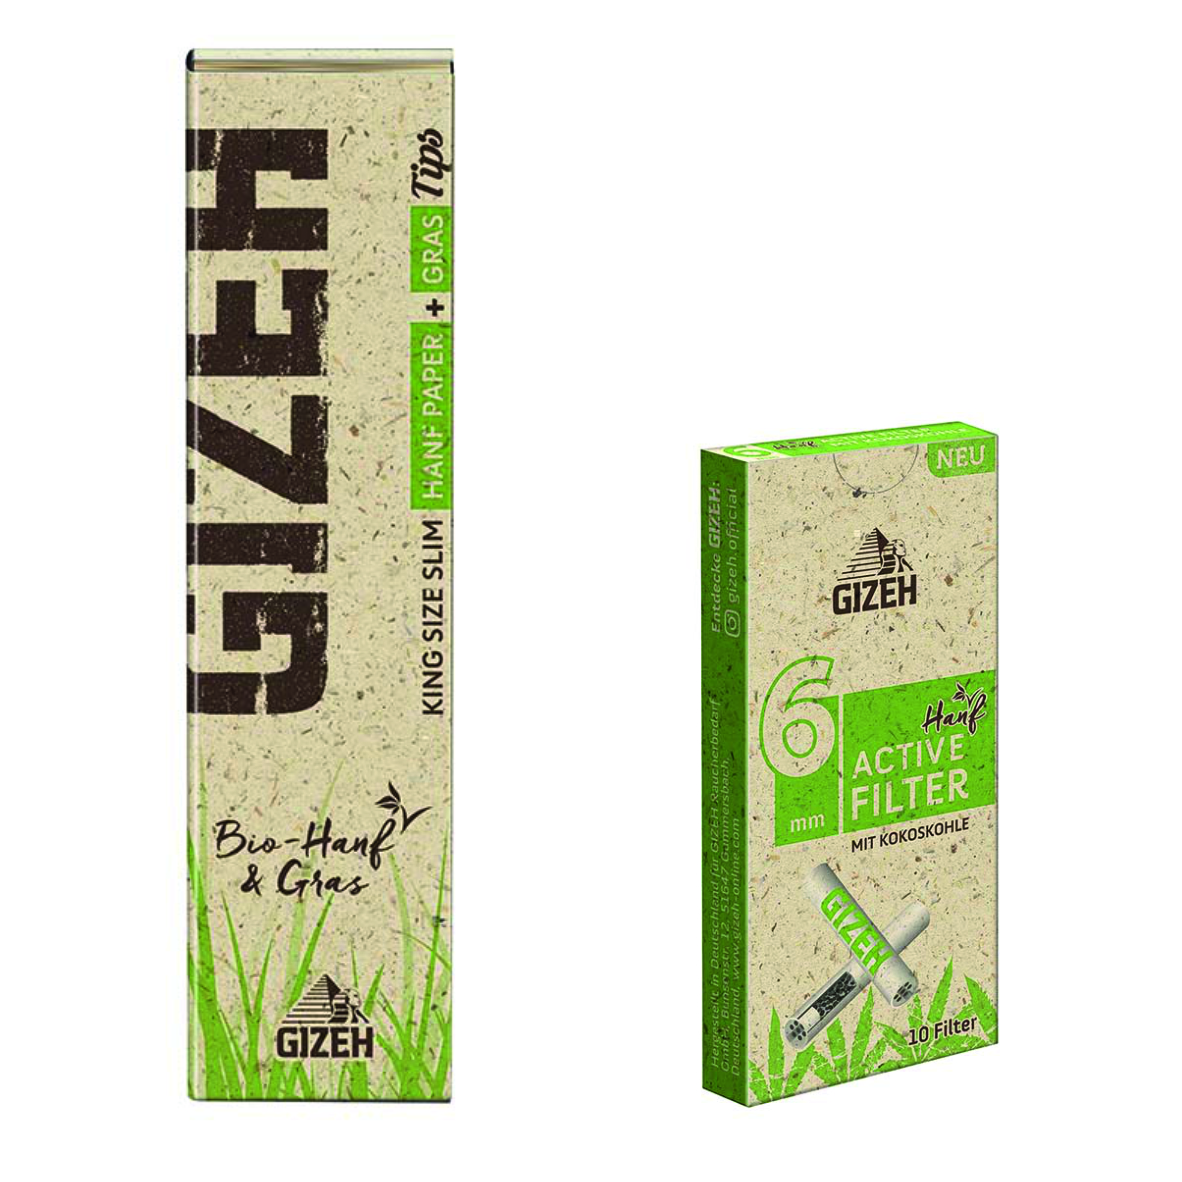 Gizeh Hanf & Gras Papers+Tips & Active Filter Bundle